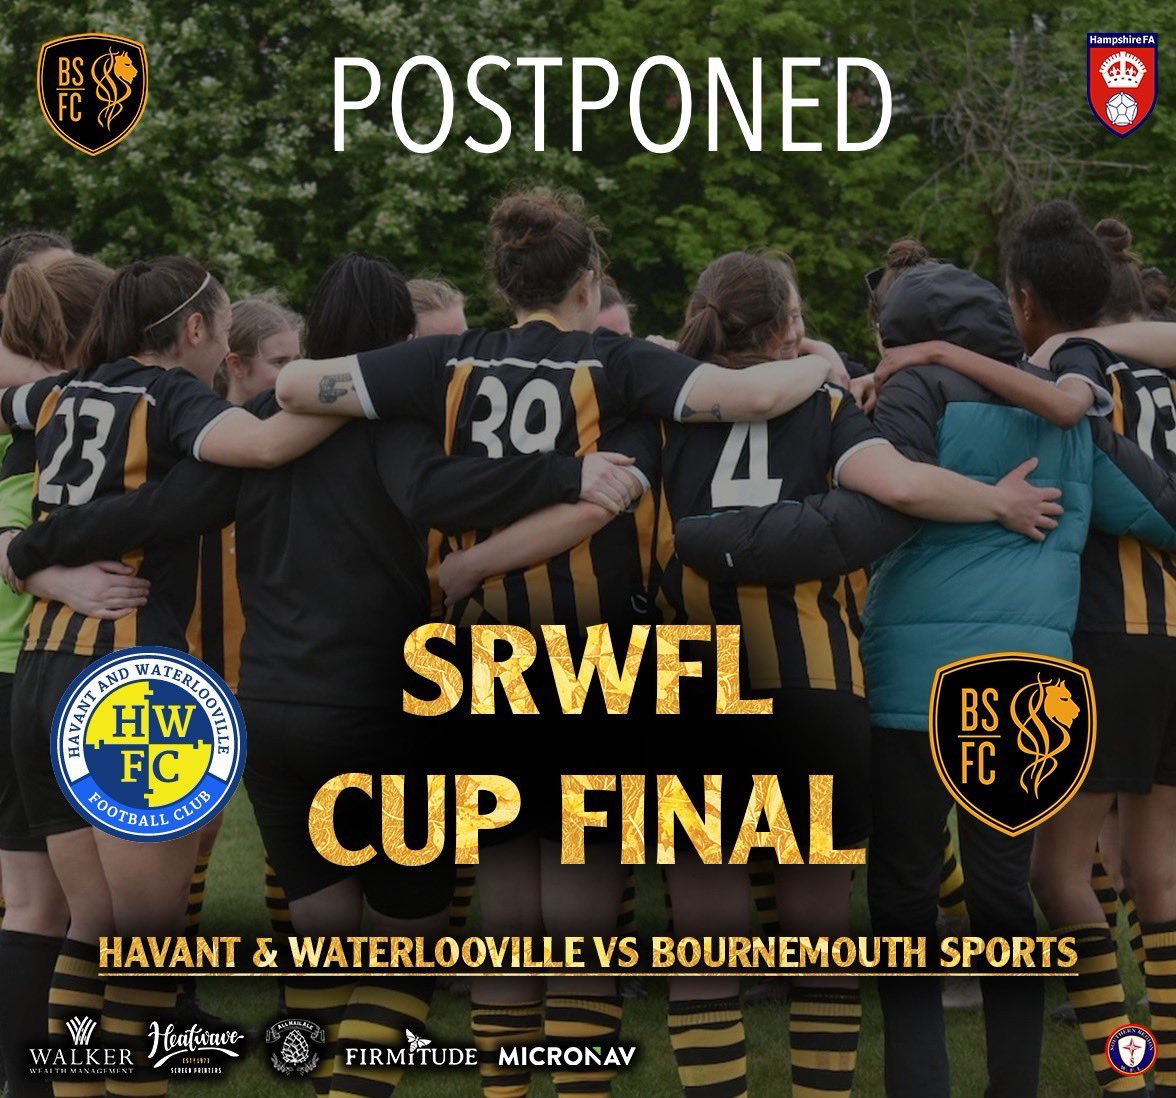 !POSTPONED! Unfortunately today’s cup final has been postponed due to heavy rain. We wait to hear when it will take place. @swsportsnews @firmitude @HeatwavePrint @All_Hail_Ale @MicroNav